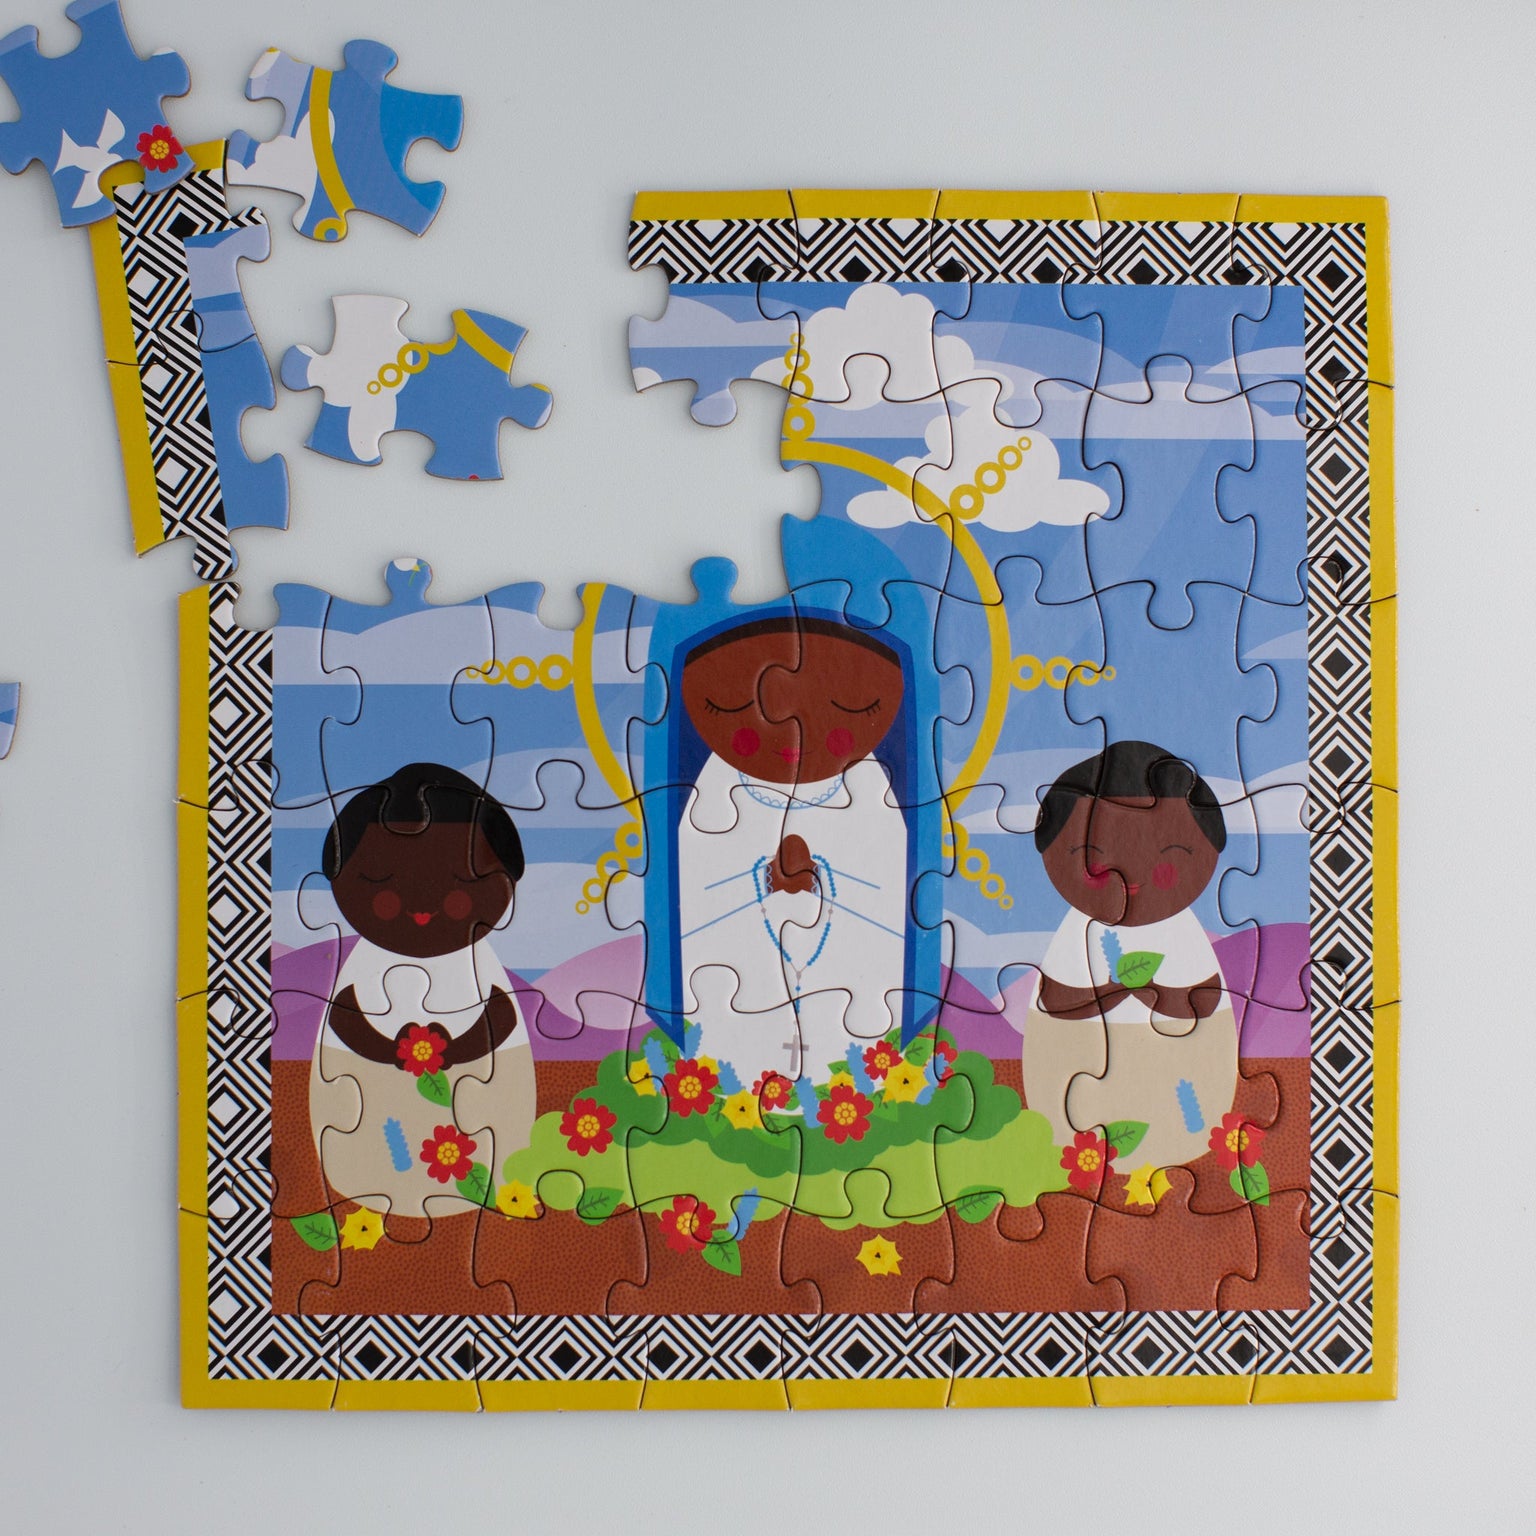 Our Lady of Kibeho Mini Puzzle